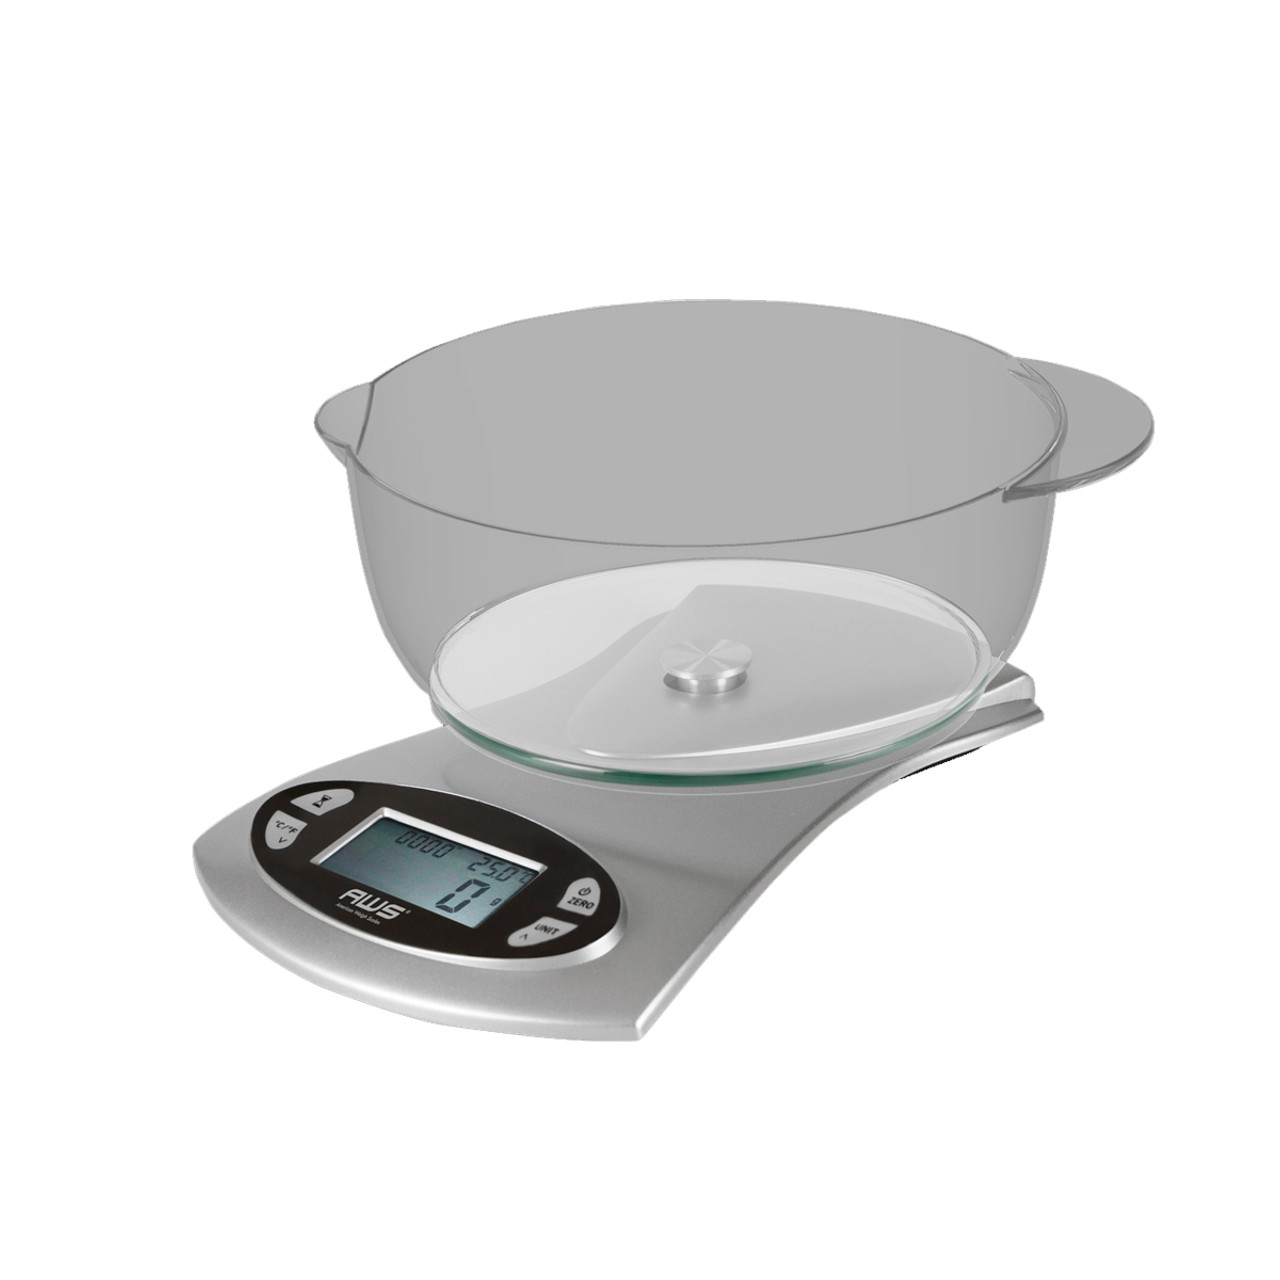 Measure Master 740635 Digital Scale with Bowl, 5000g